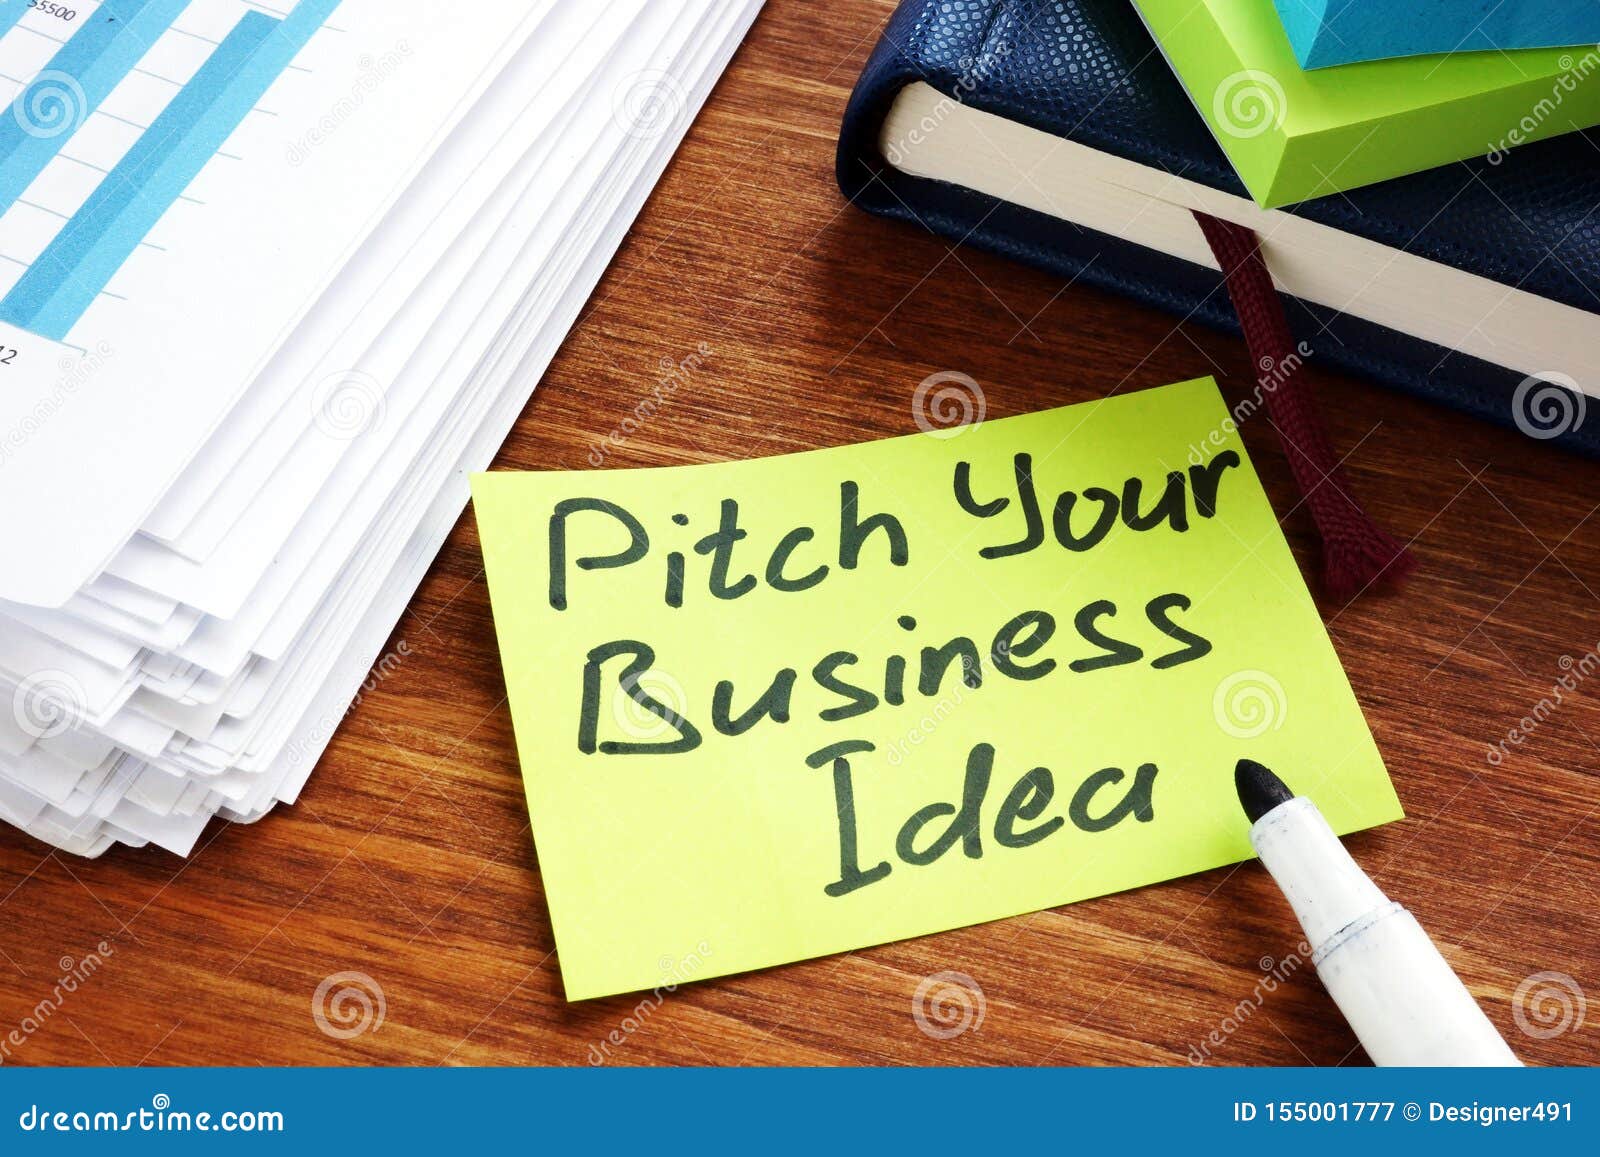 pitch your business idea sign on a memo stick